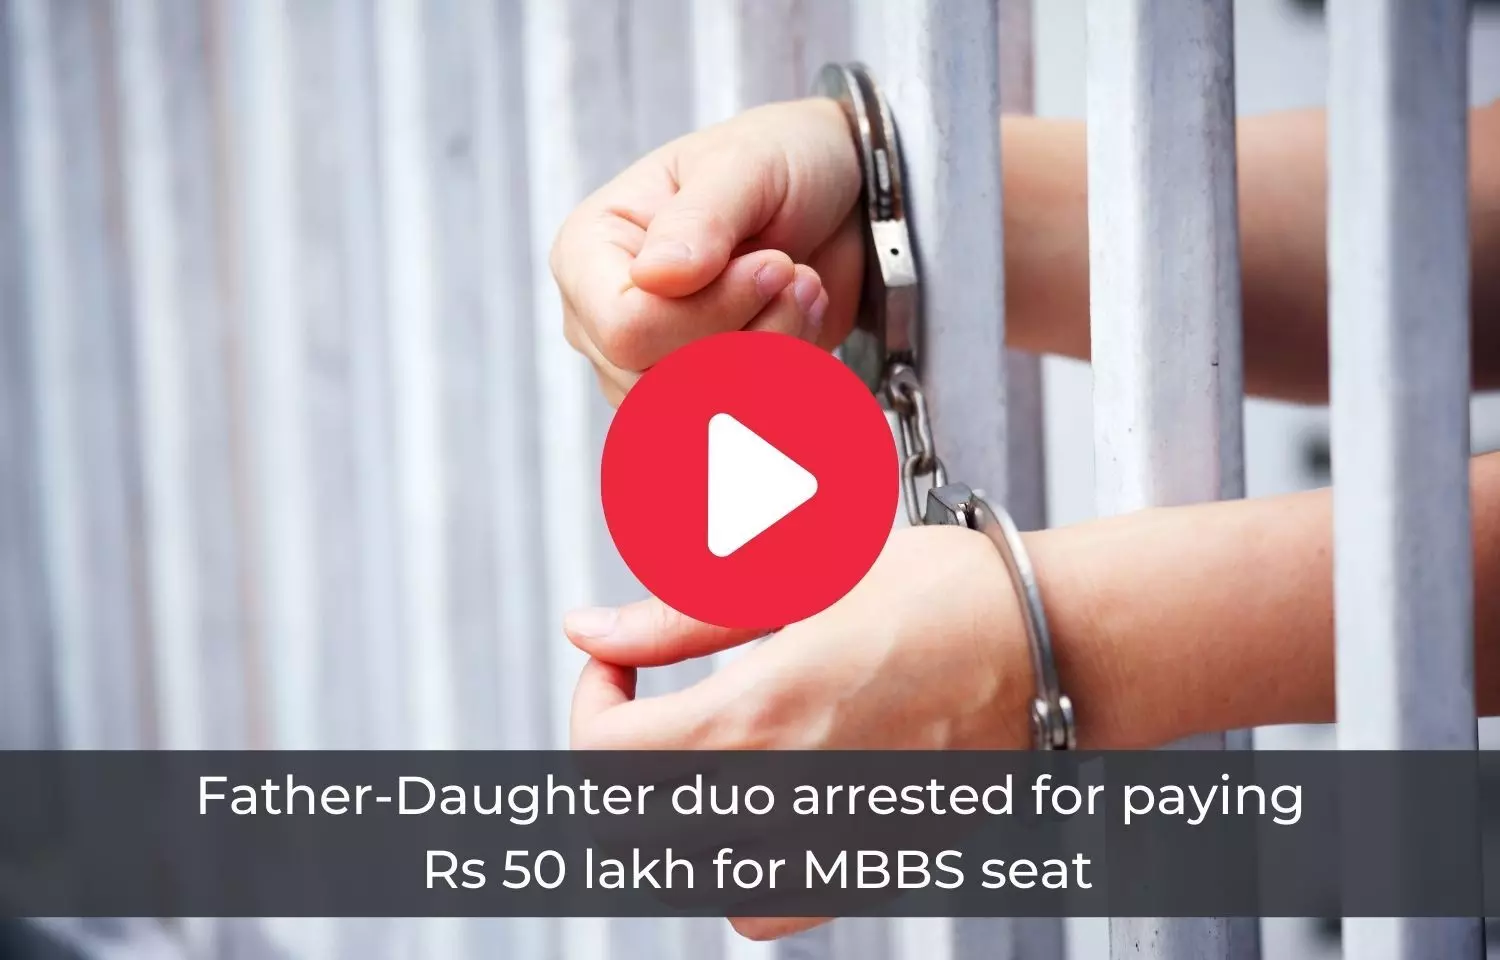 Father-Daughter duo arrested for paying Rs 50 Lakh for MBBS seat